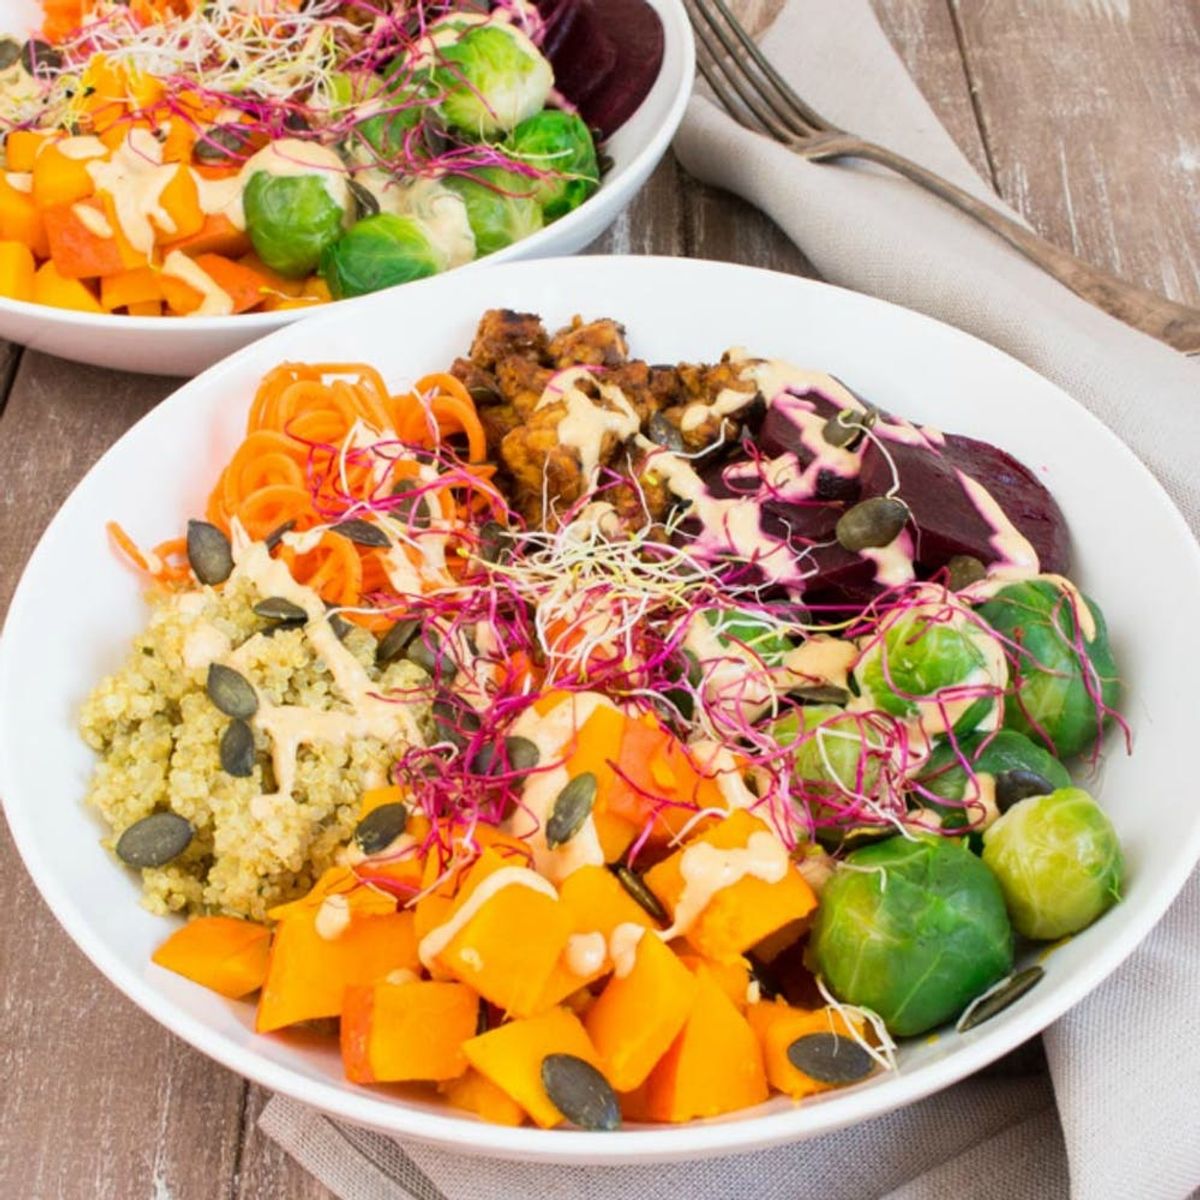 Warm Up With 14 Fall-Inspired Meatless Monday Recipes